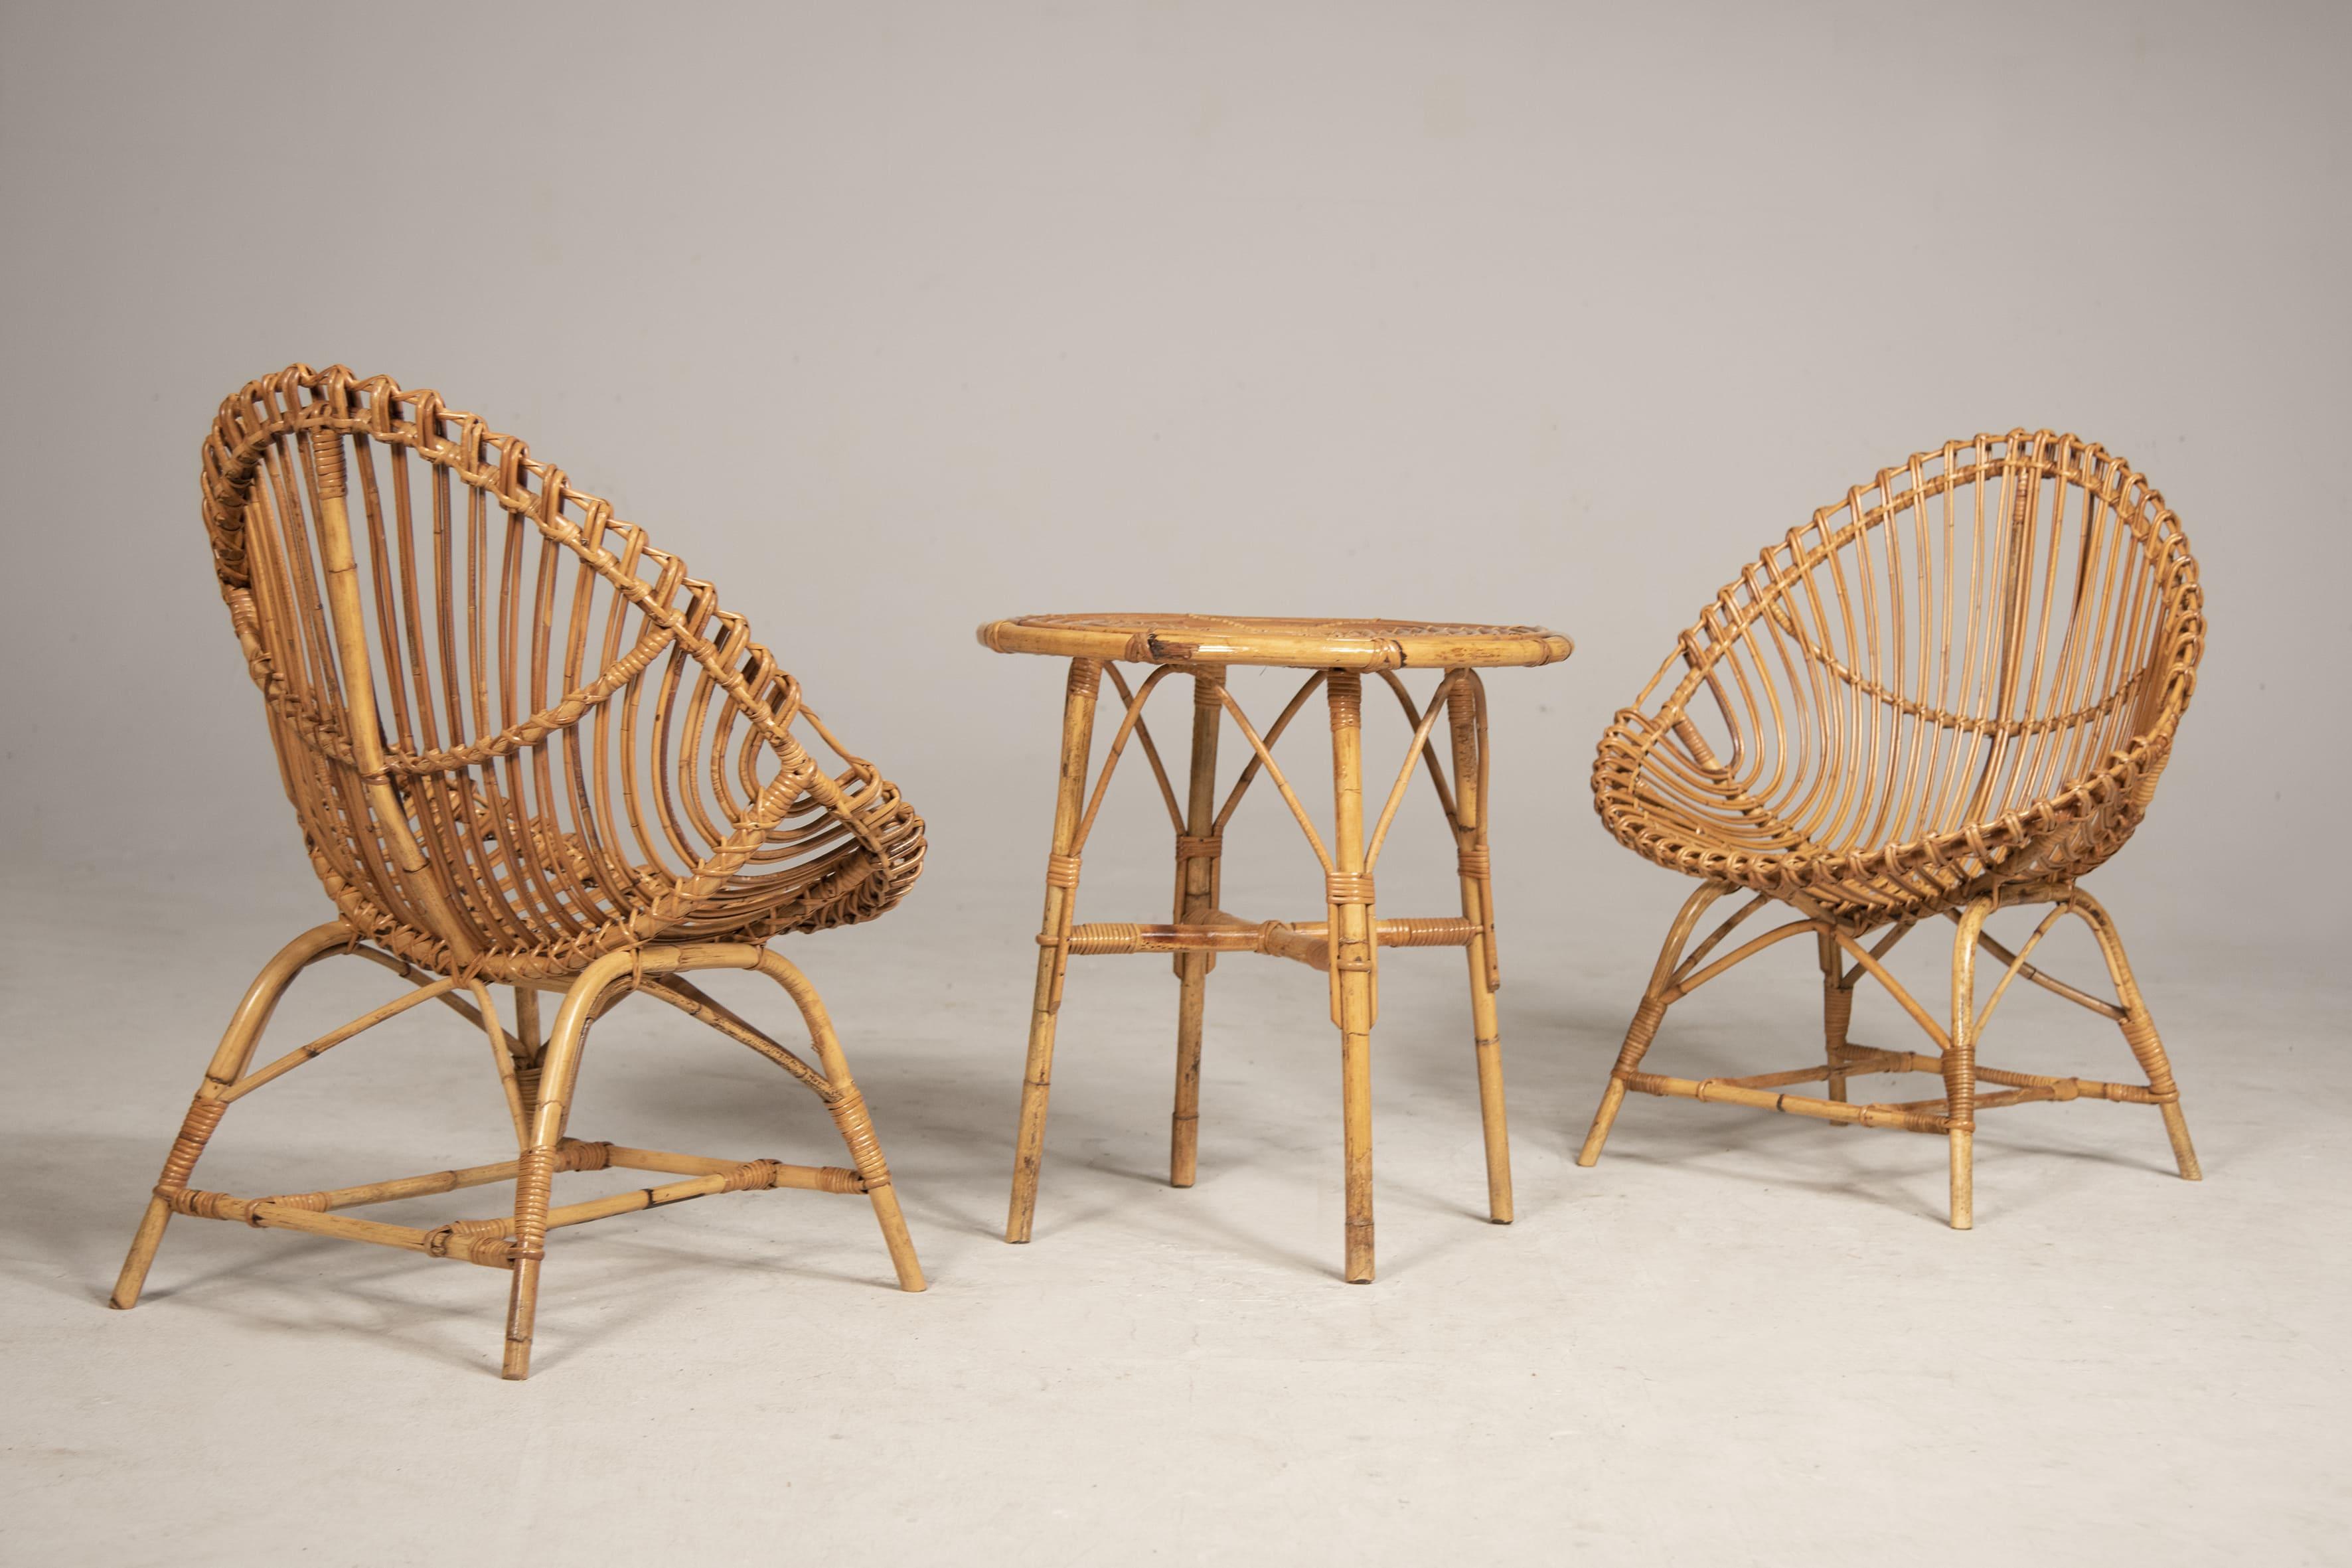 Albini 1950s Wicker Set of Armchairs and Coffee Table For Sale 3